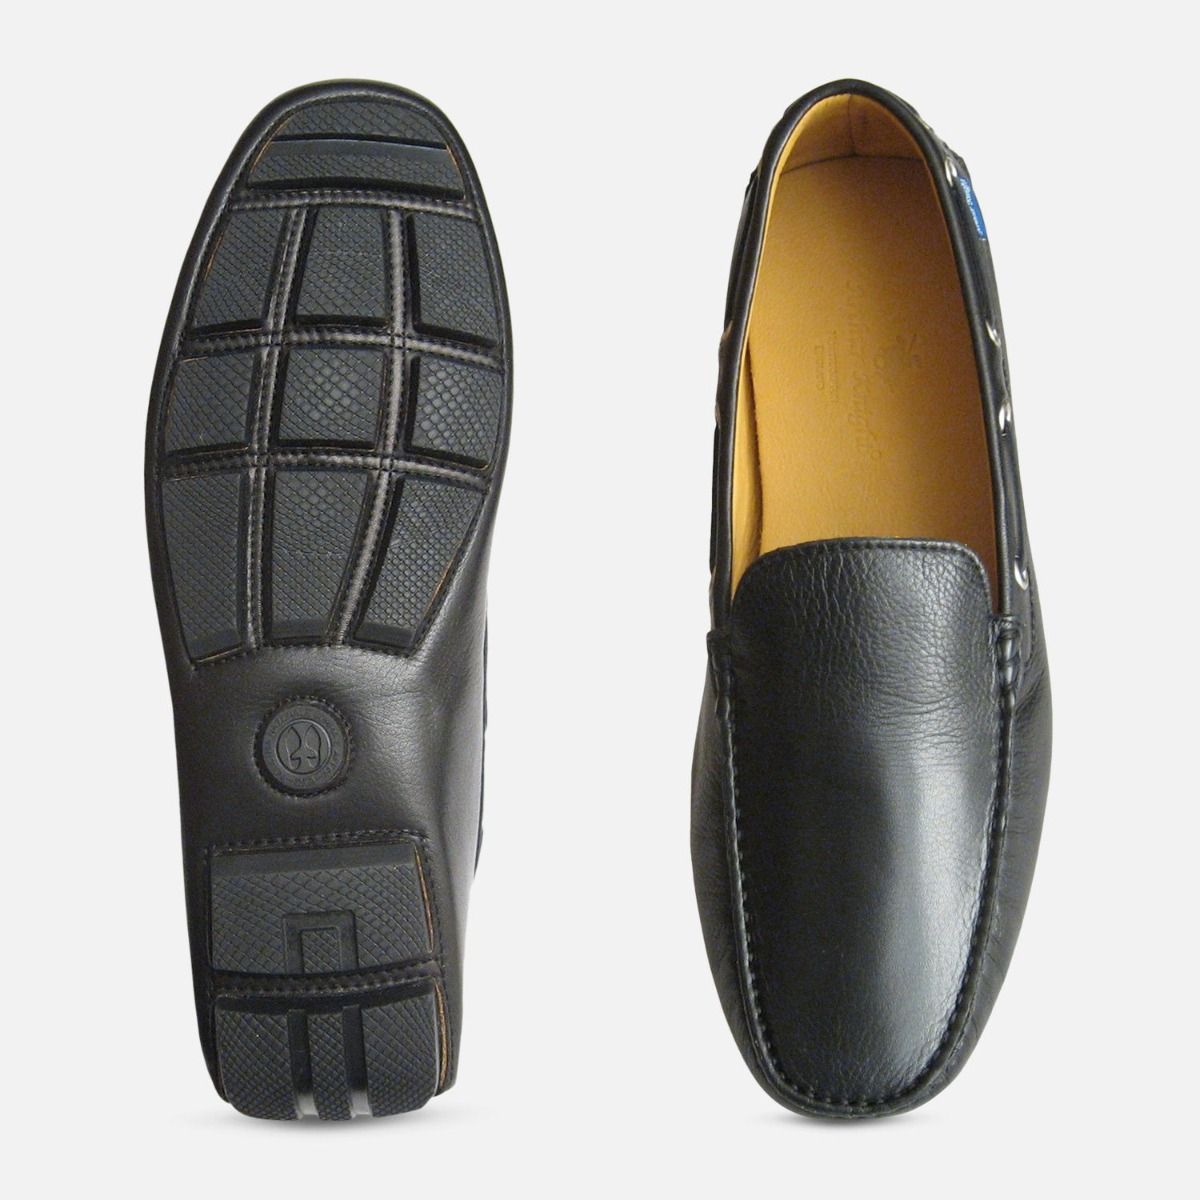 Black Calf Leather Italian Driving Shoes for Men by Arthur Knight